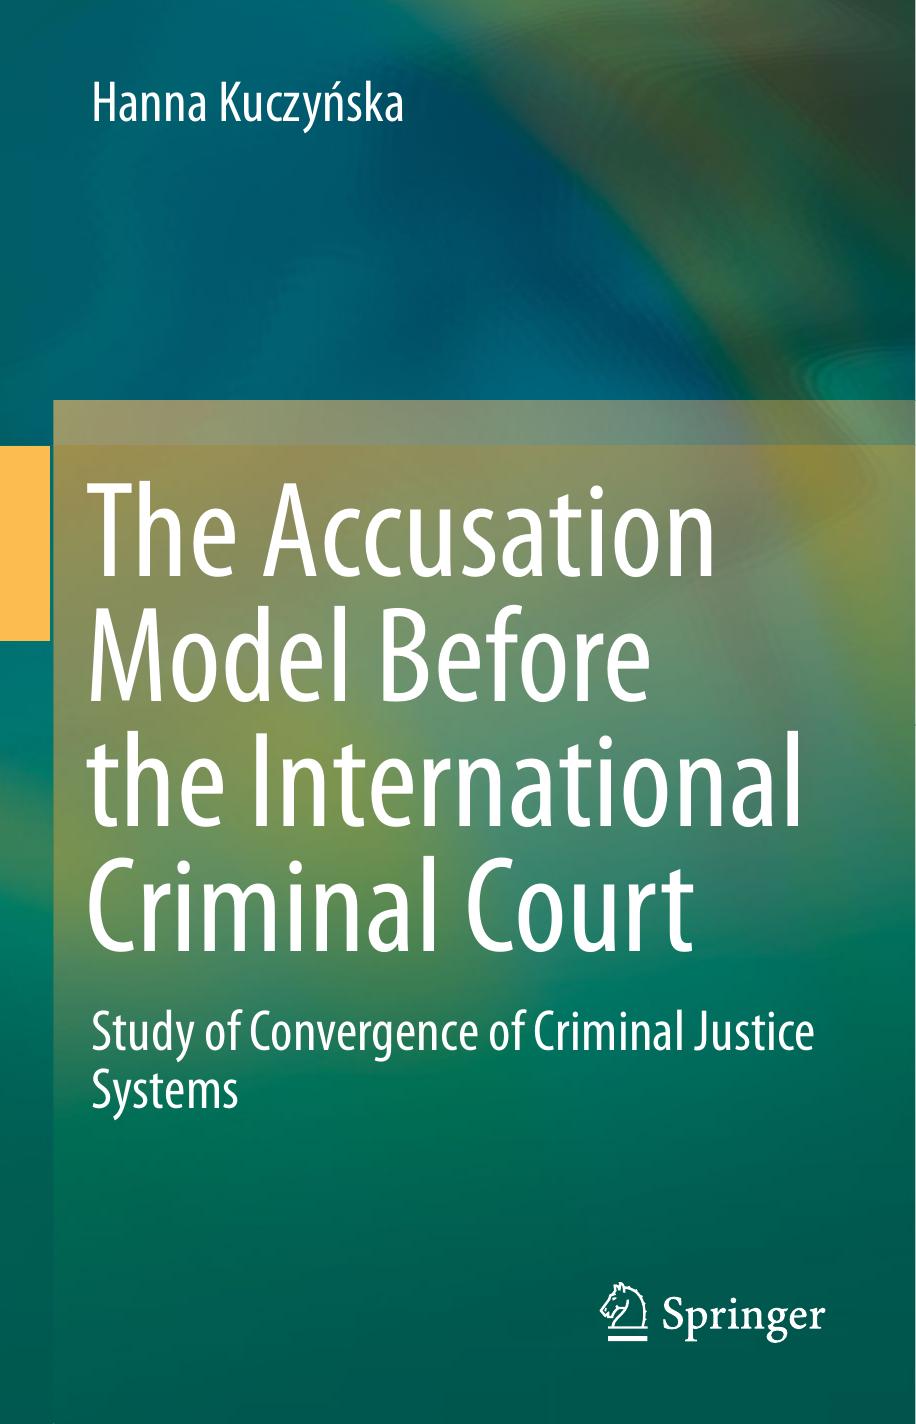 The Accusation Model Before the International Criminal Court Study of Convergence of Criminal Justice Systems 2015